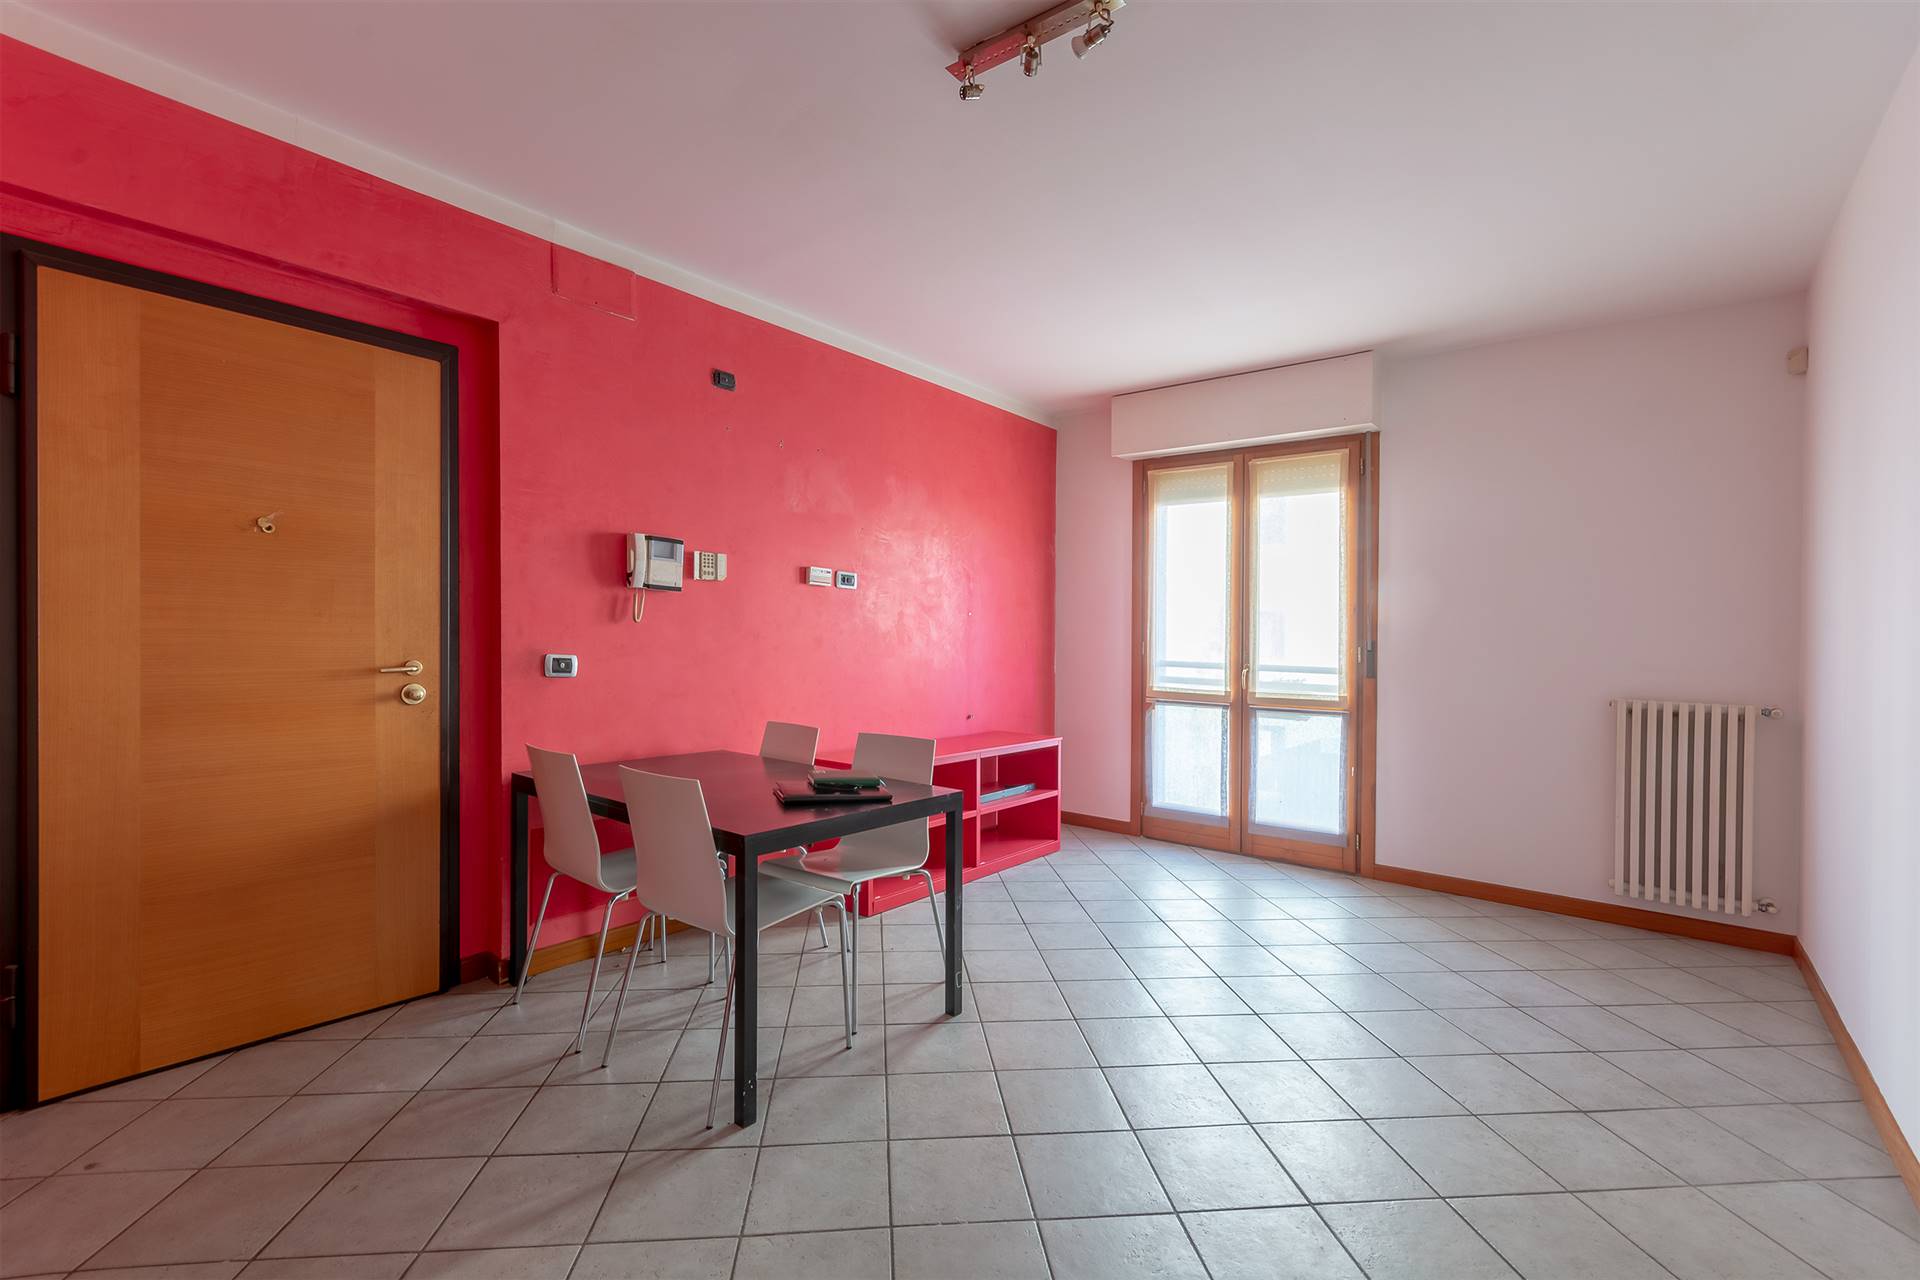 PORTA A PRATO, FIRENZE, Apartment for sale of 66 Sq. mt., Good condition, Heating Individual heating system, Energetic class: G, placed at 2° on 5, composed by: 3 Rooms, Little kitchen, , 1 Bedroom, 